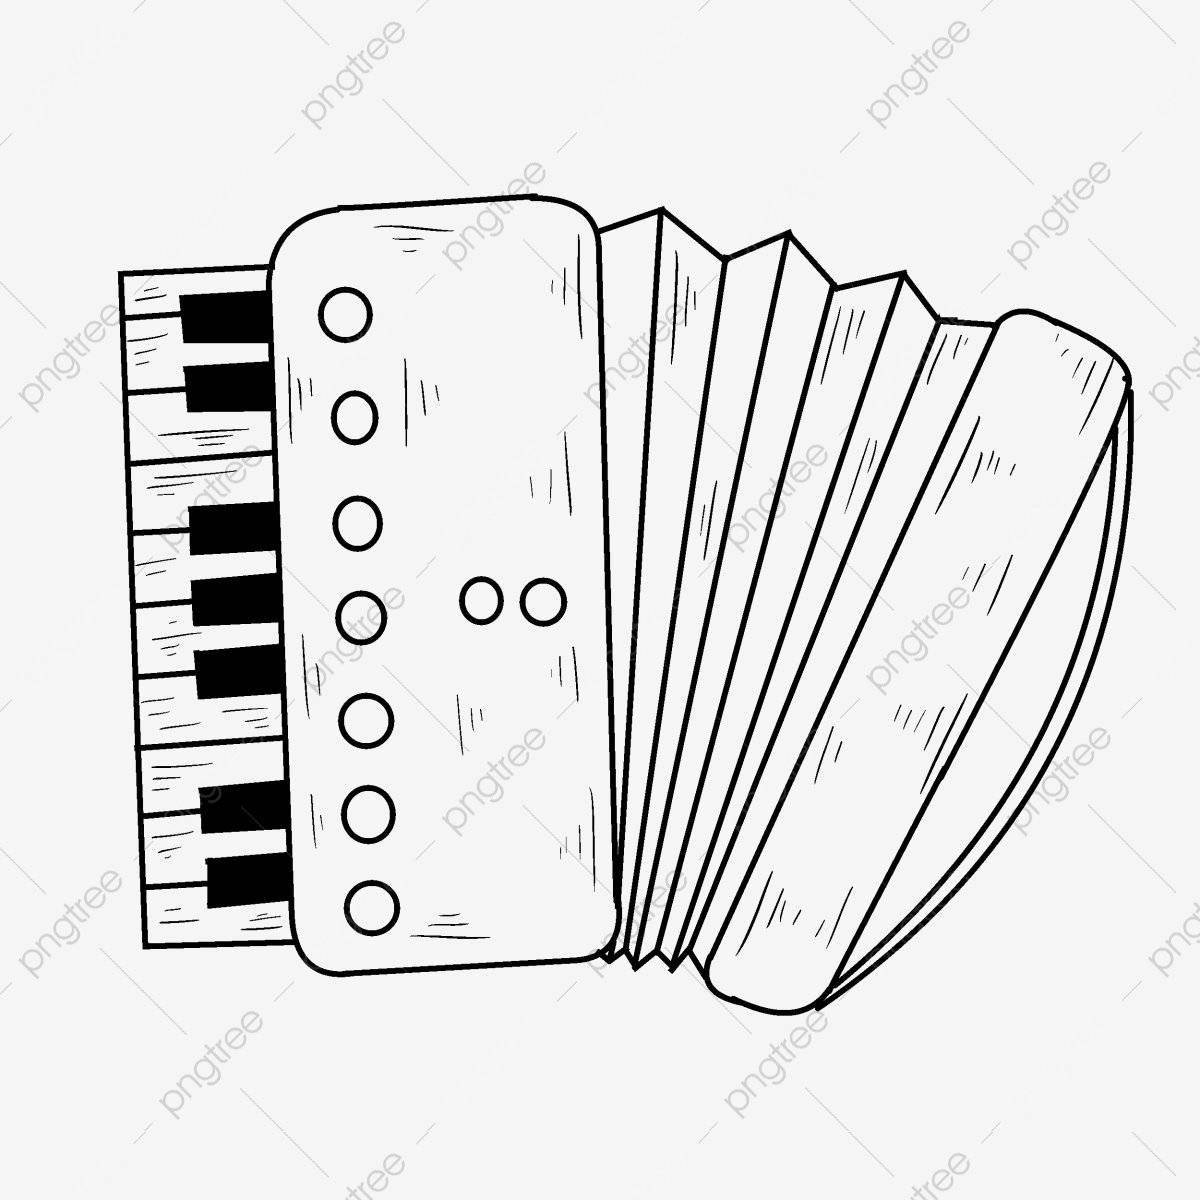 Great accordion coloring book for the little ones